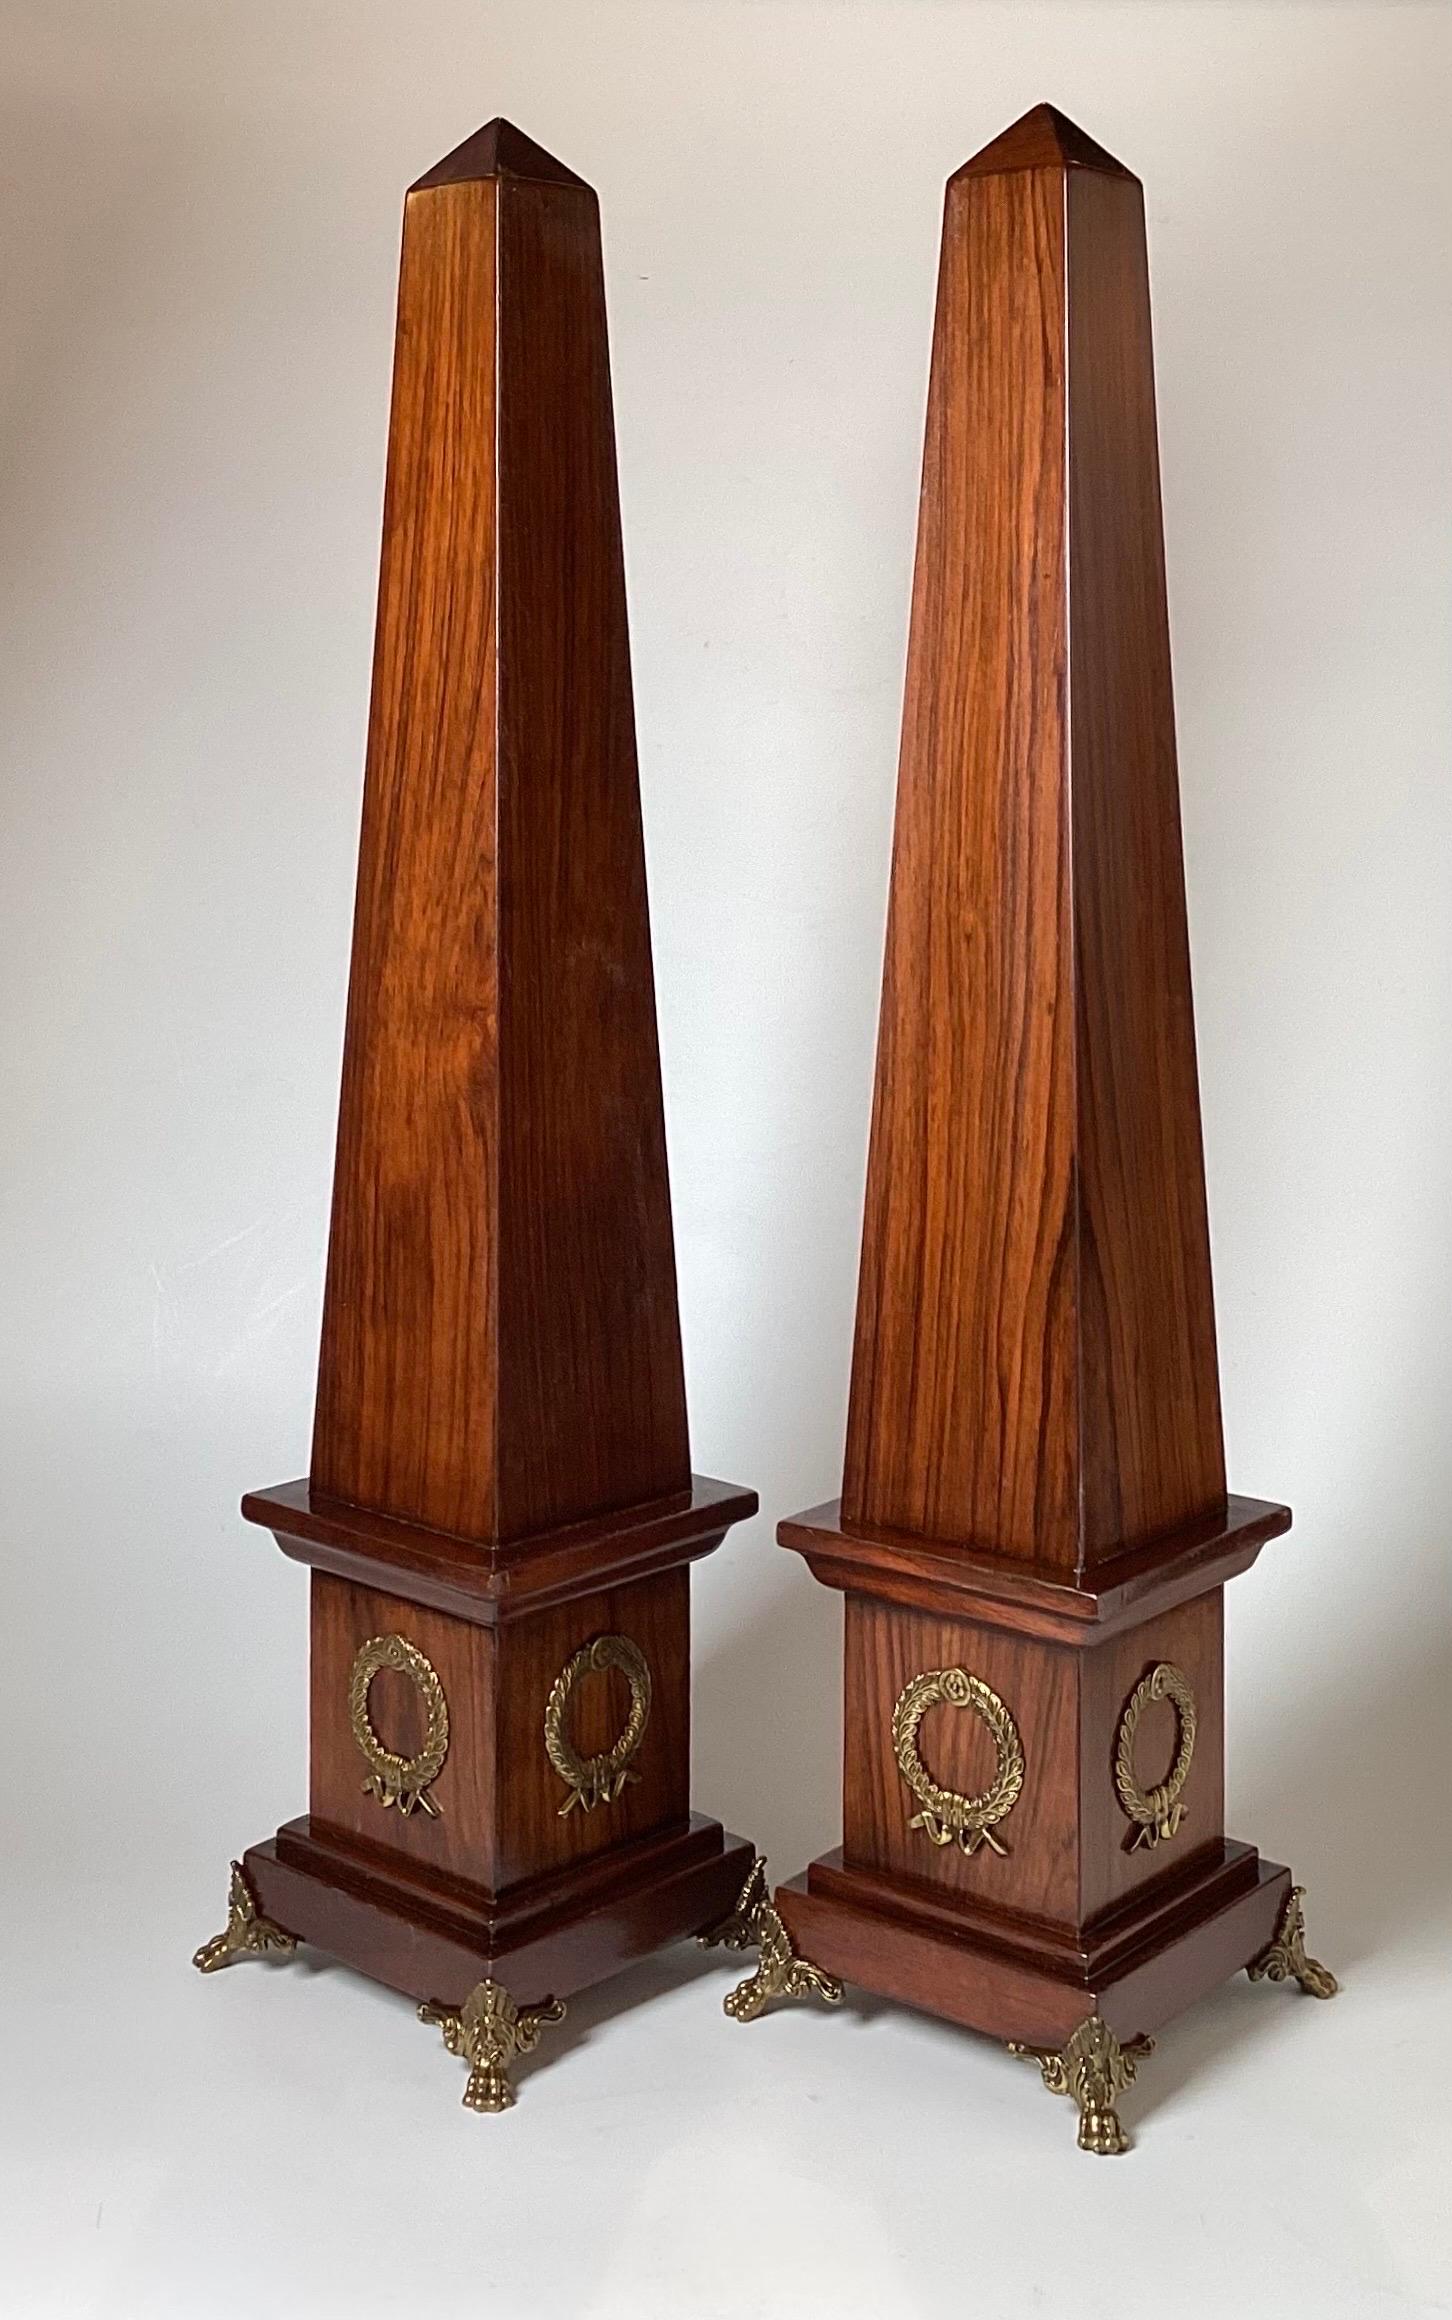 20th Century Pair of Rosewood Obelisks with Decorative Brass Mounts and Feet 1